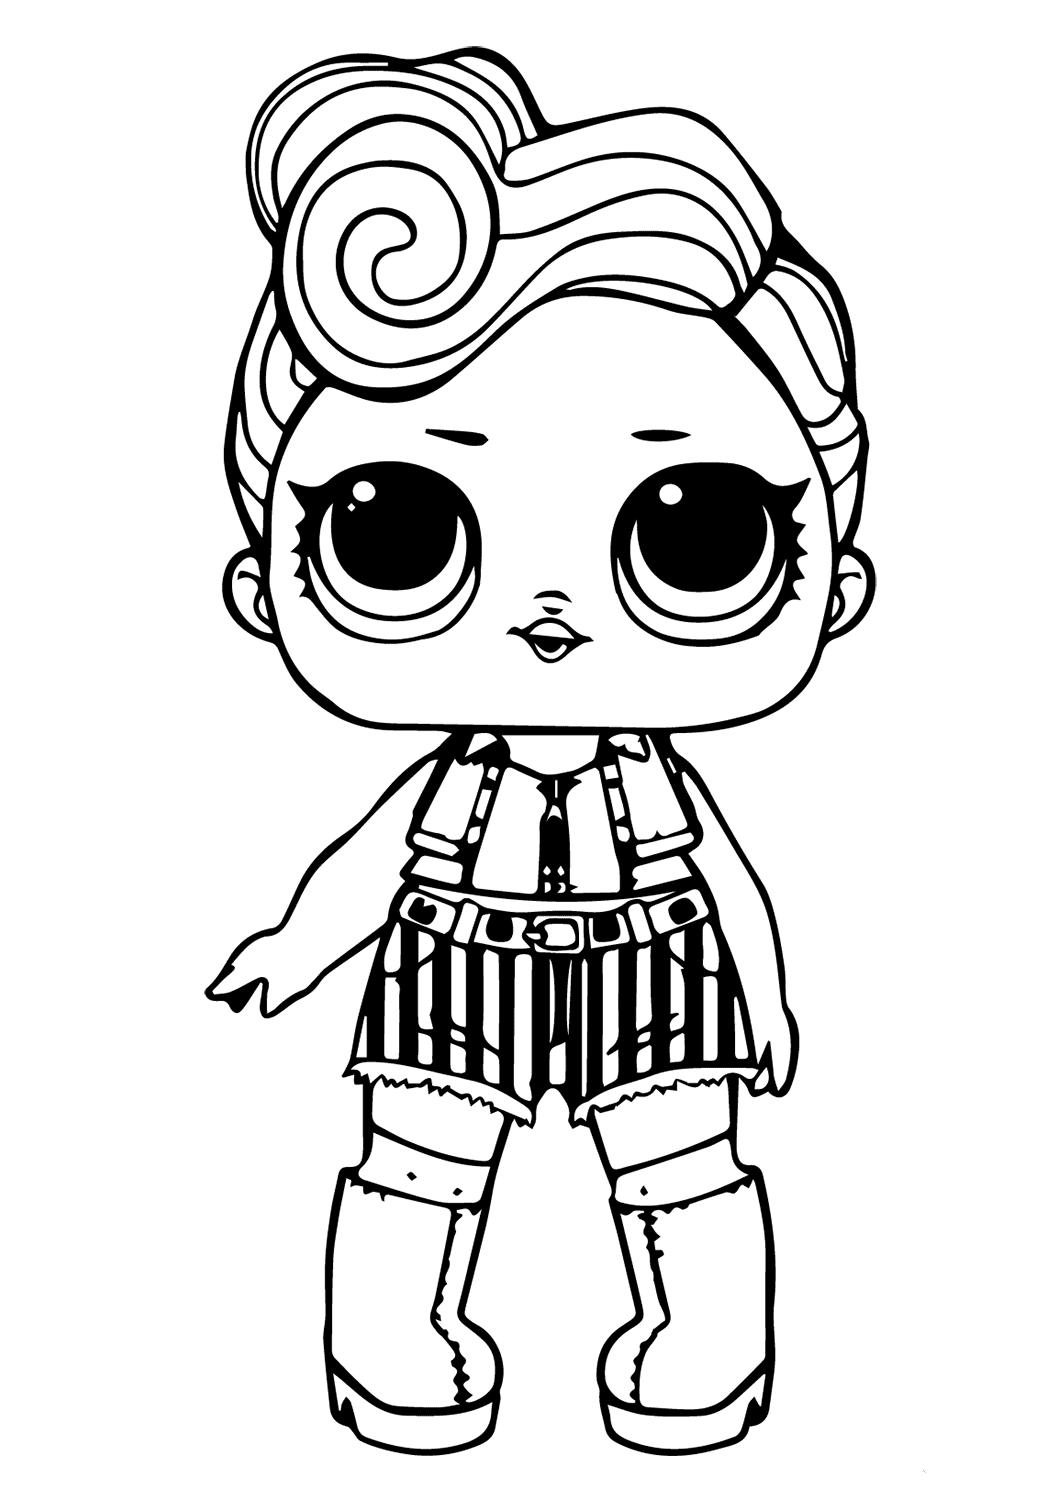 Coloring Book Free Printable Lol Surprise Dolls Coloring Page